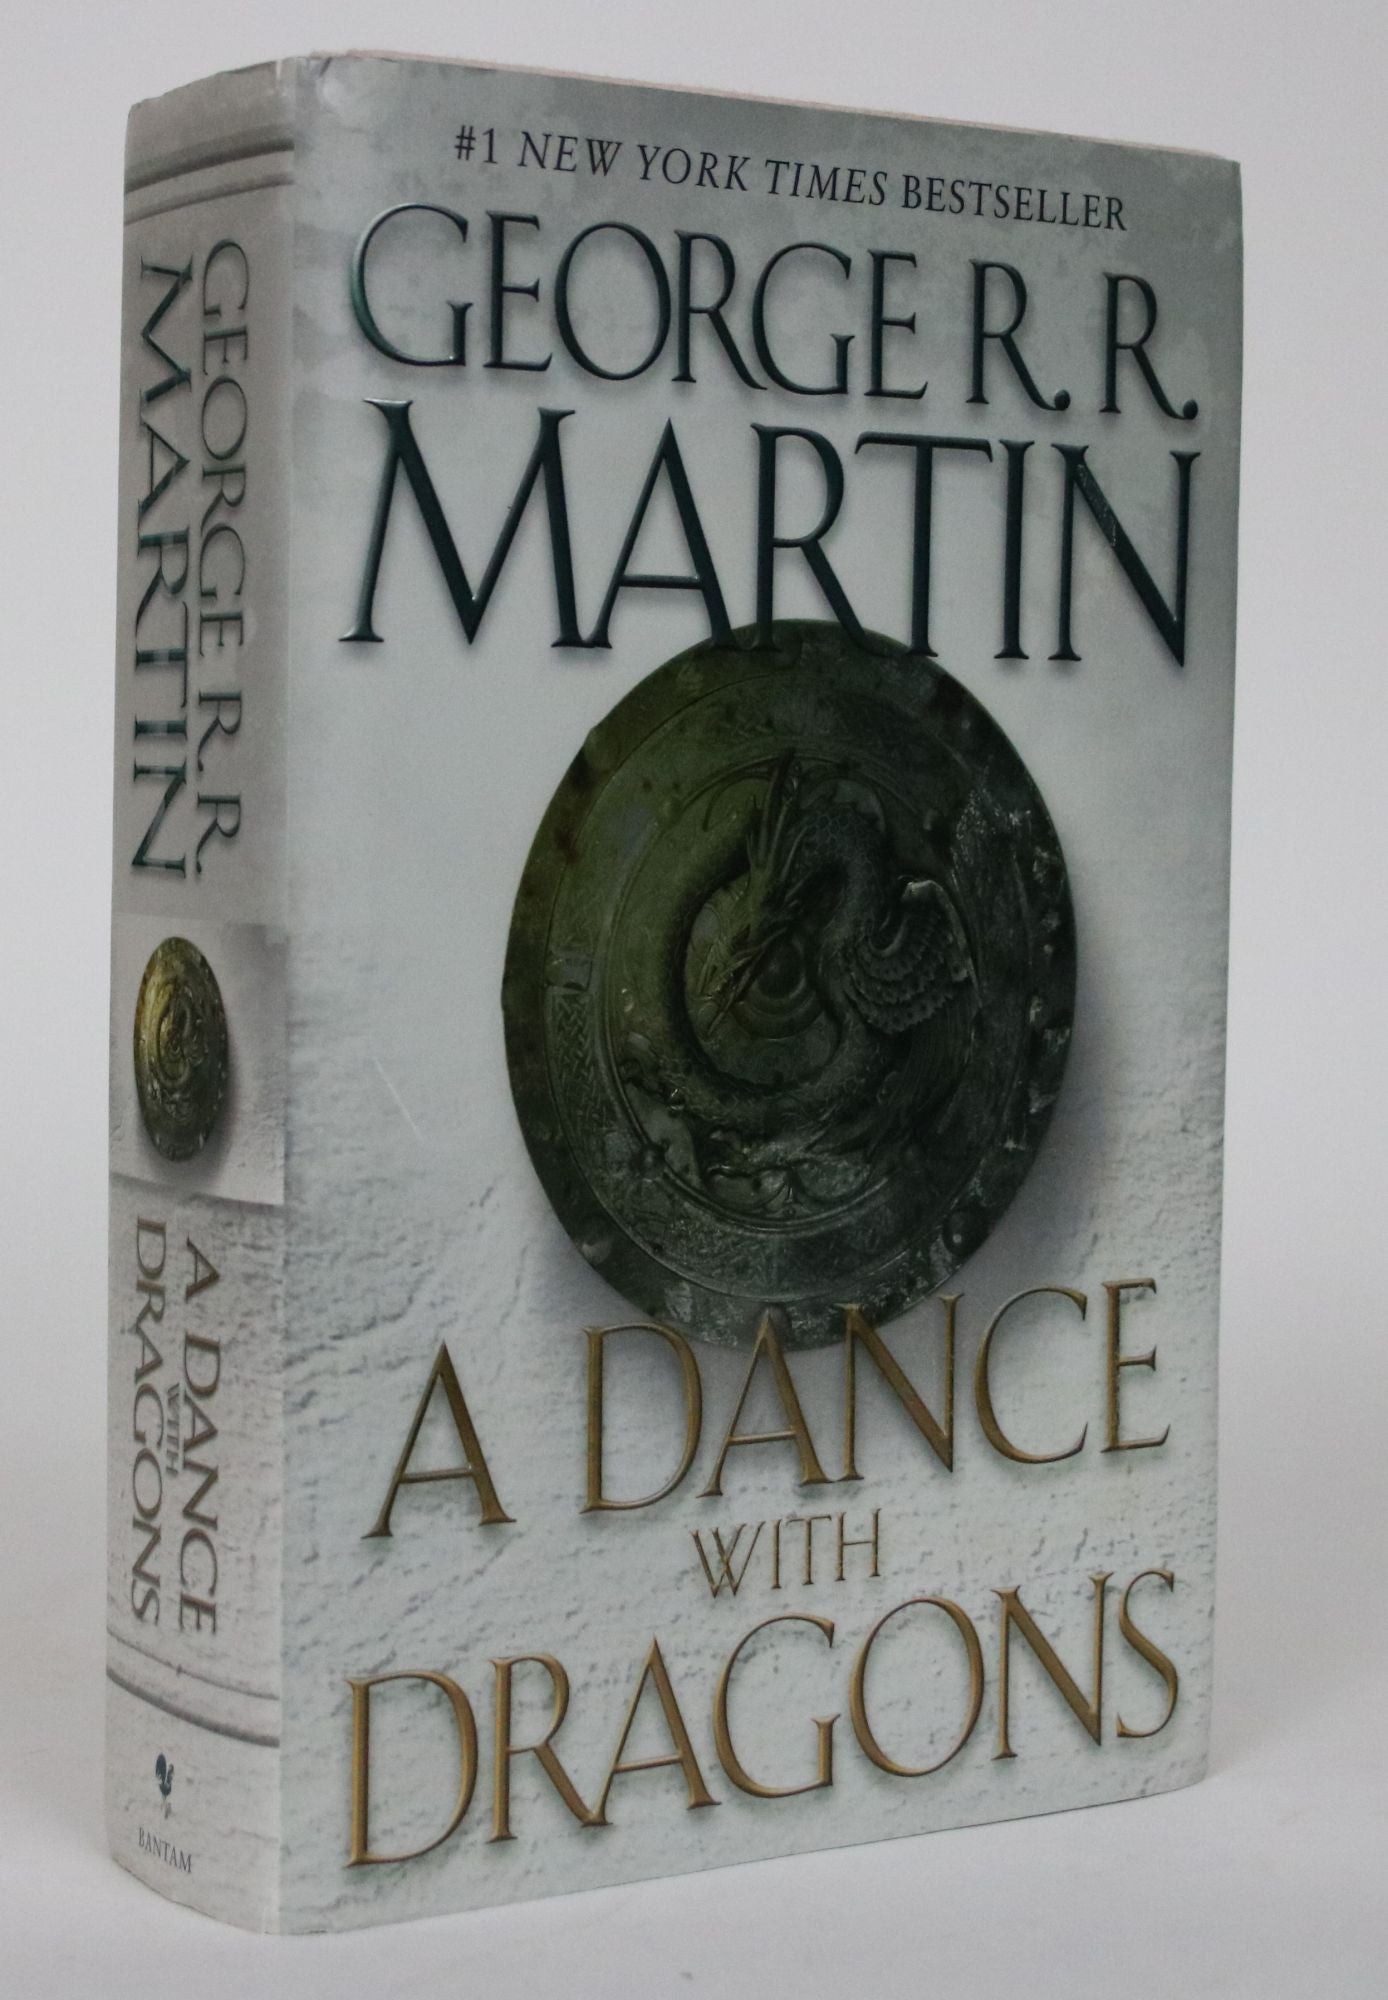 R.　Martin　A　Dragons　George　Dance　with　R.